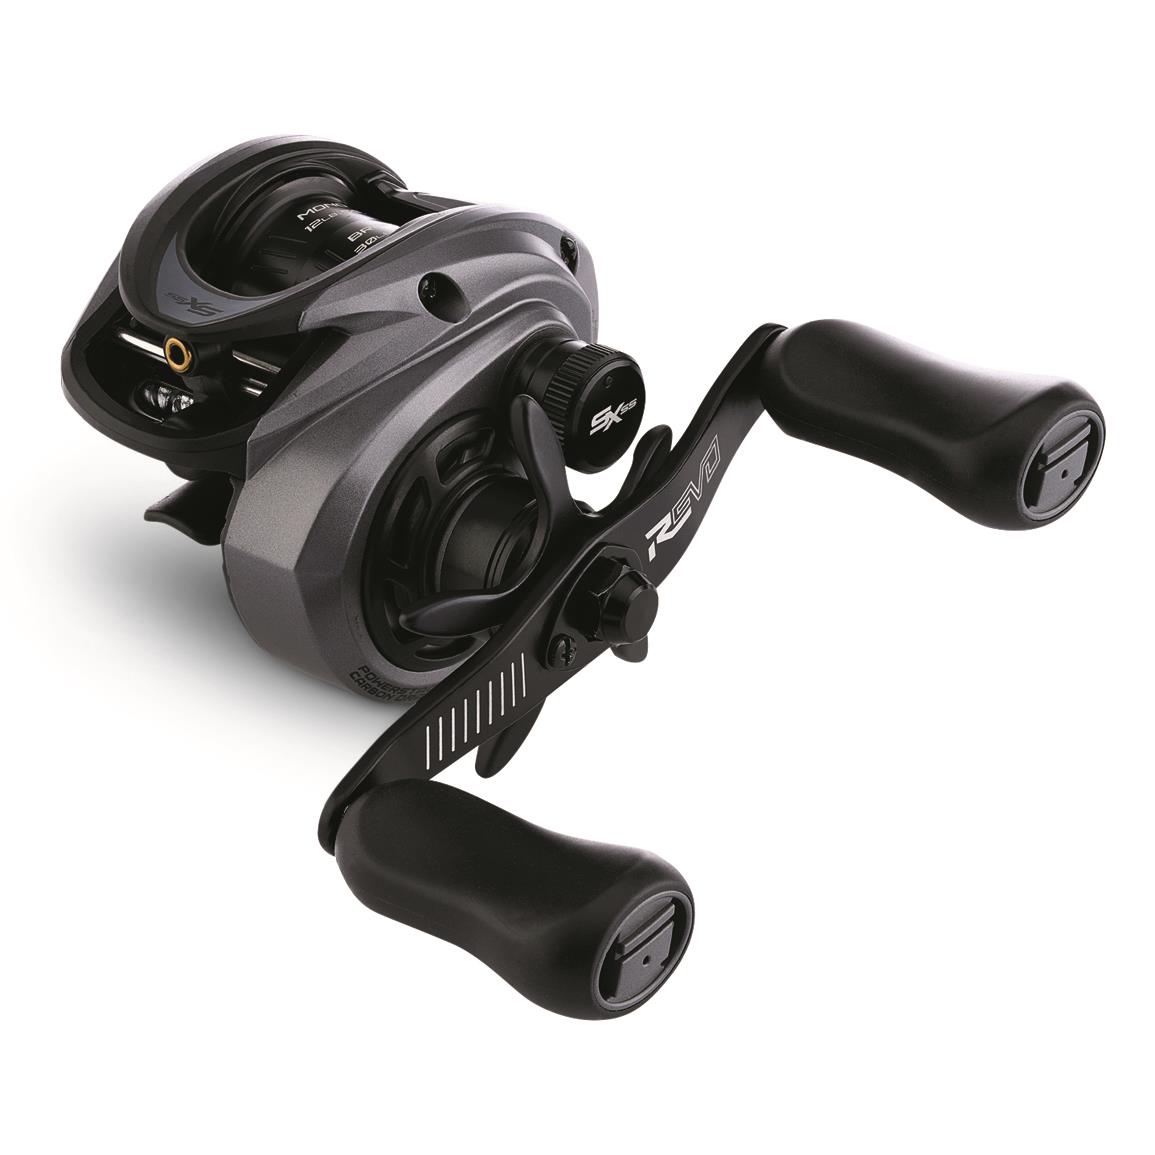 13 Fishing Inception G2 Power Low Profile Reel, 5.3:1 Gear Ratio, Left Hand  Retrieve - 729840, Baitcasting Reels at Sportsman's Guide